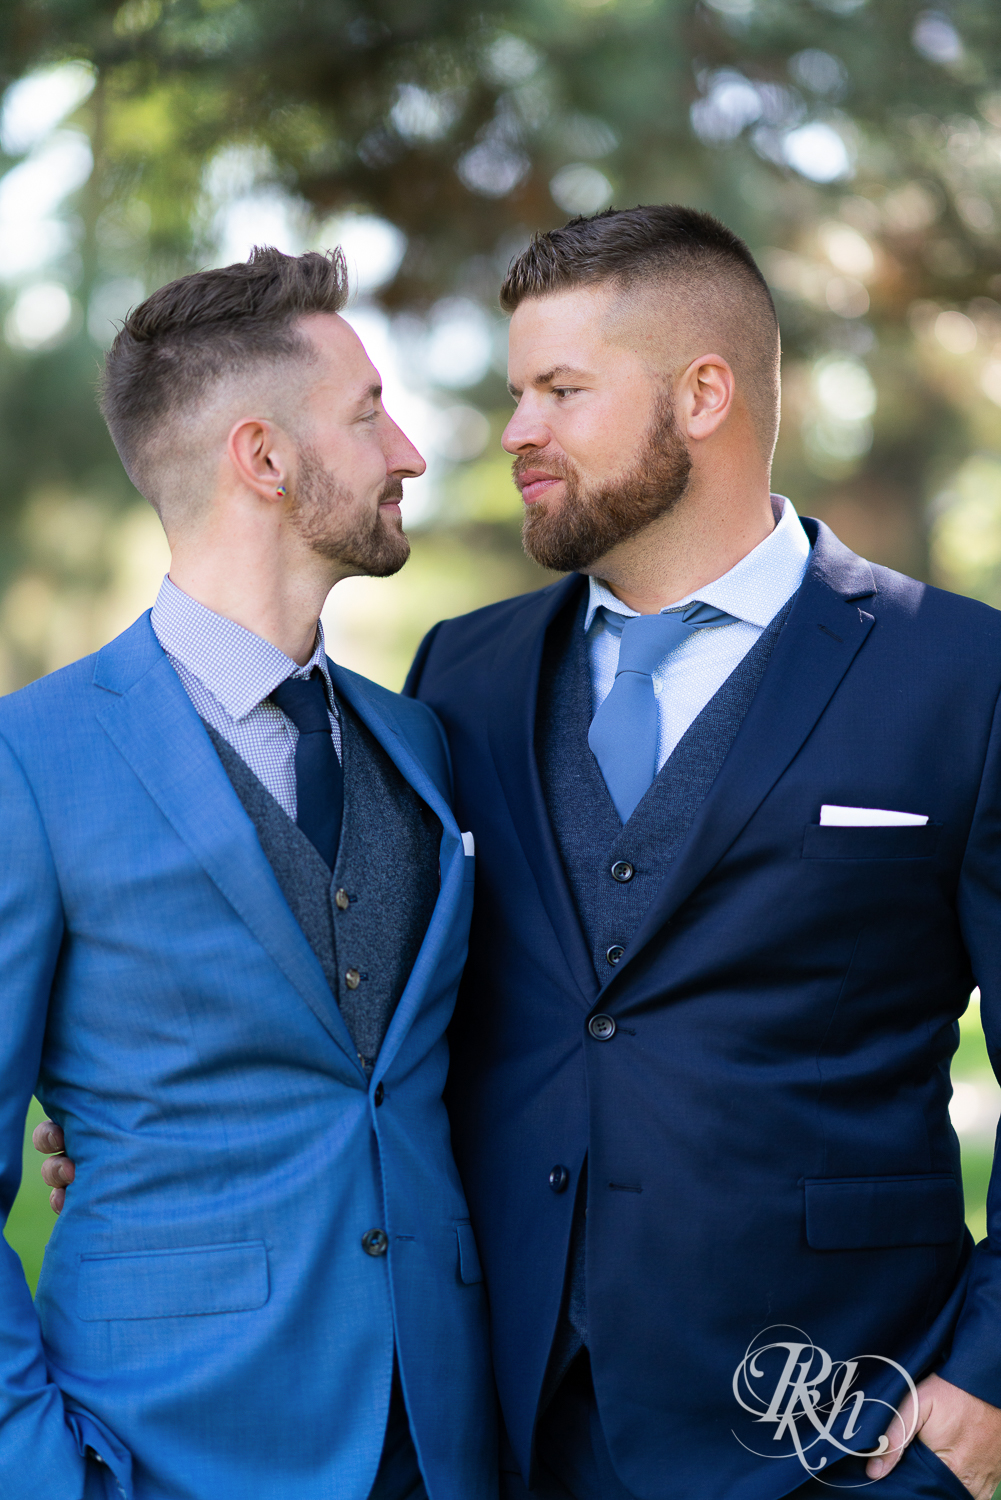 Gay grooms in blue suits smiling on wedding day at Nicollet Island in Minneapolis, Minnesota.